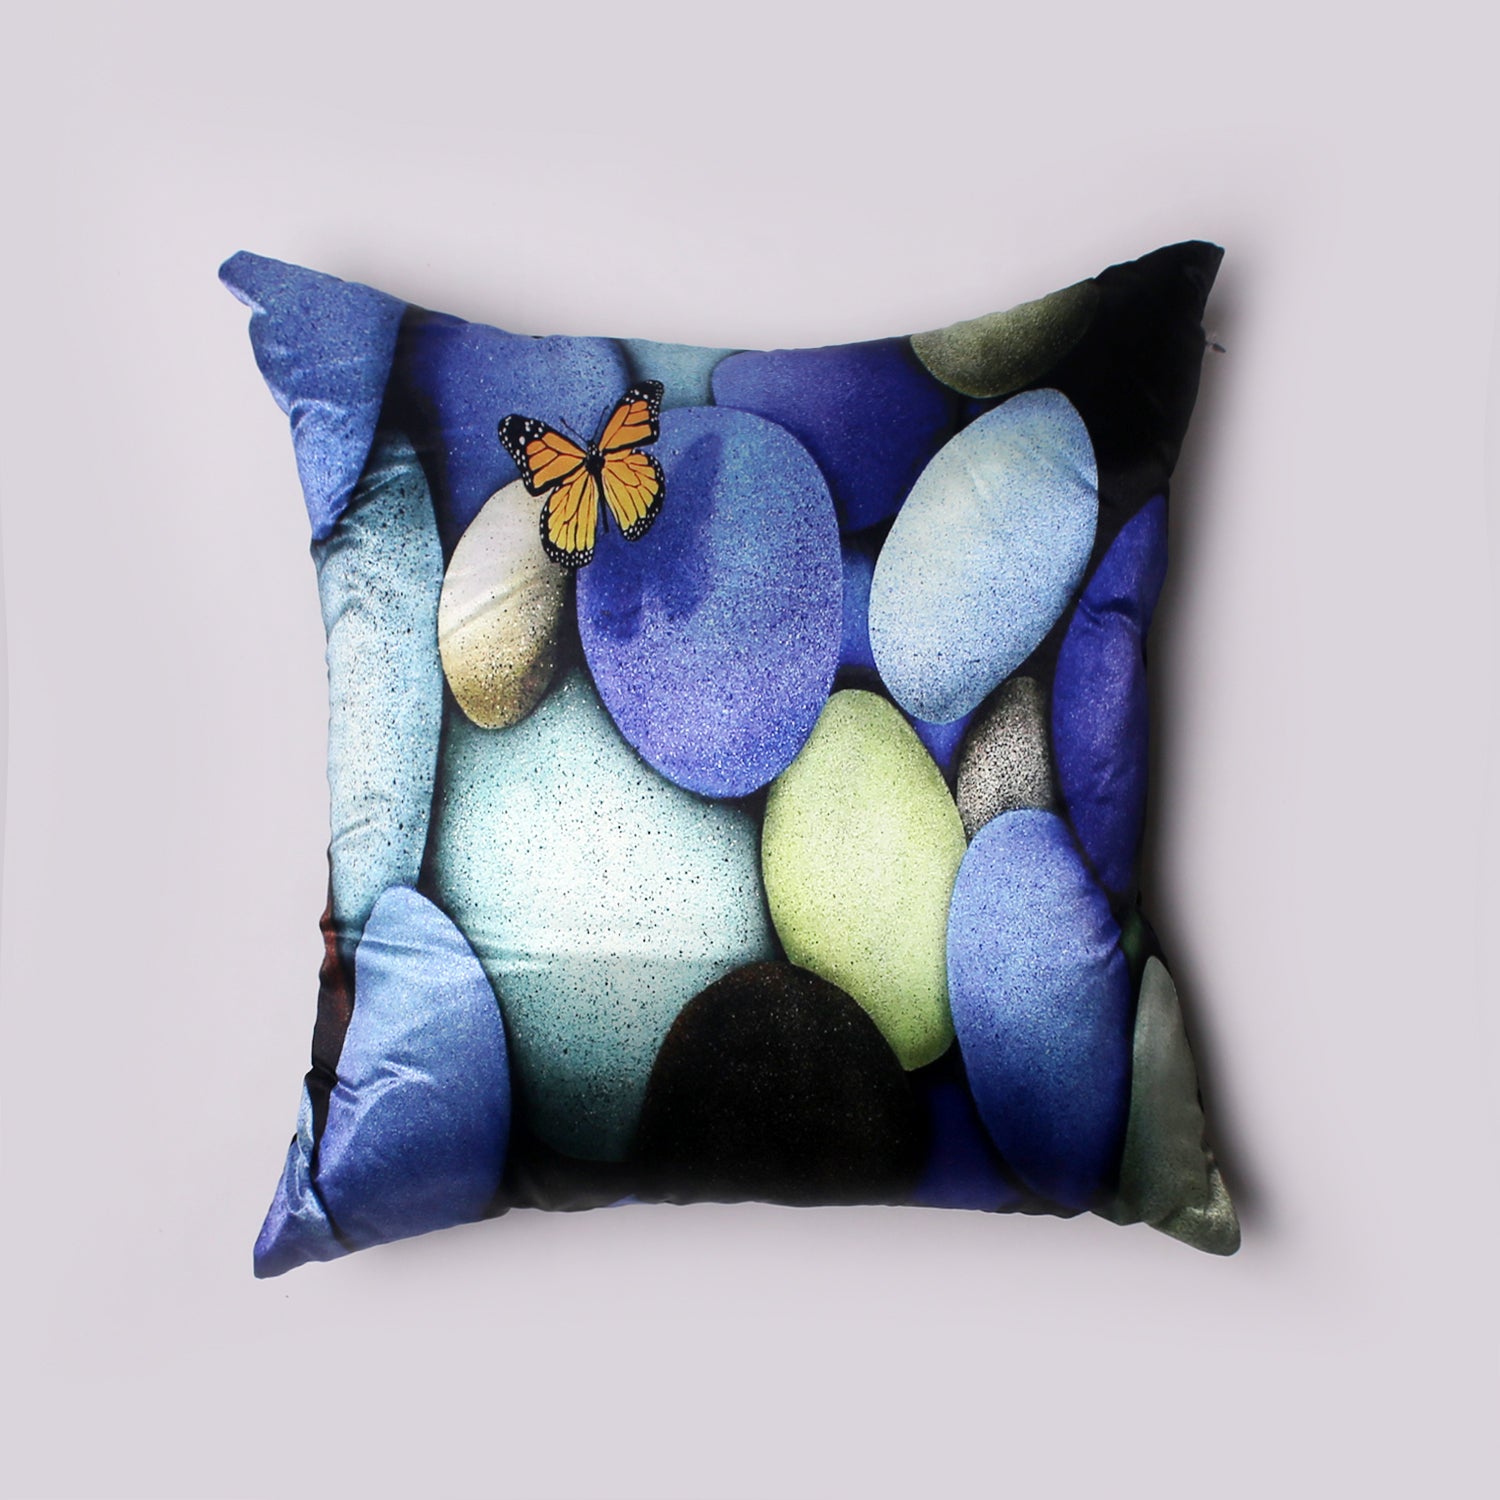 NEW STONES WITH BUTTERFLY 3D DIGITAL PRINTED CUSHION PILLOW